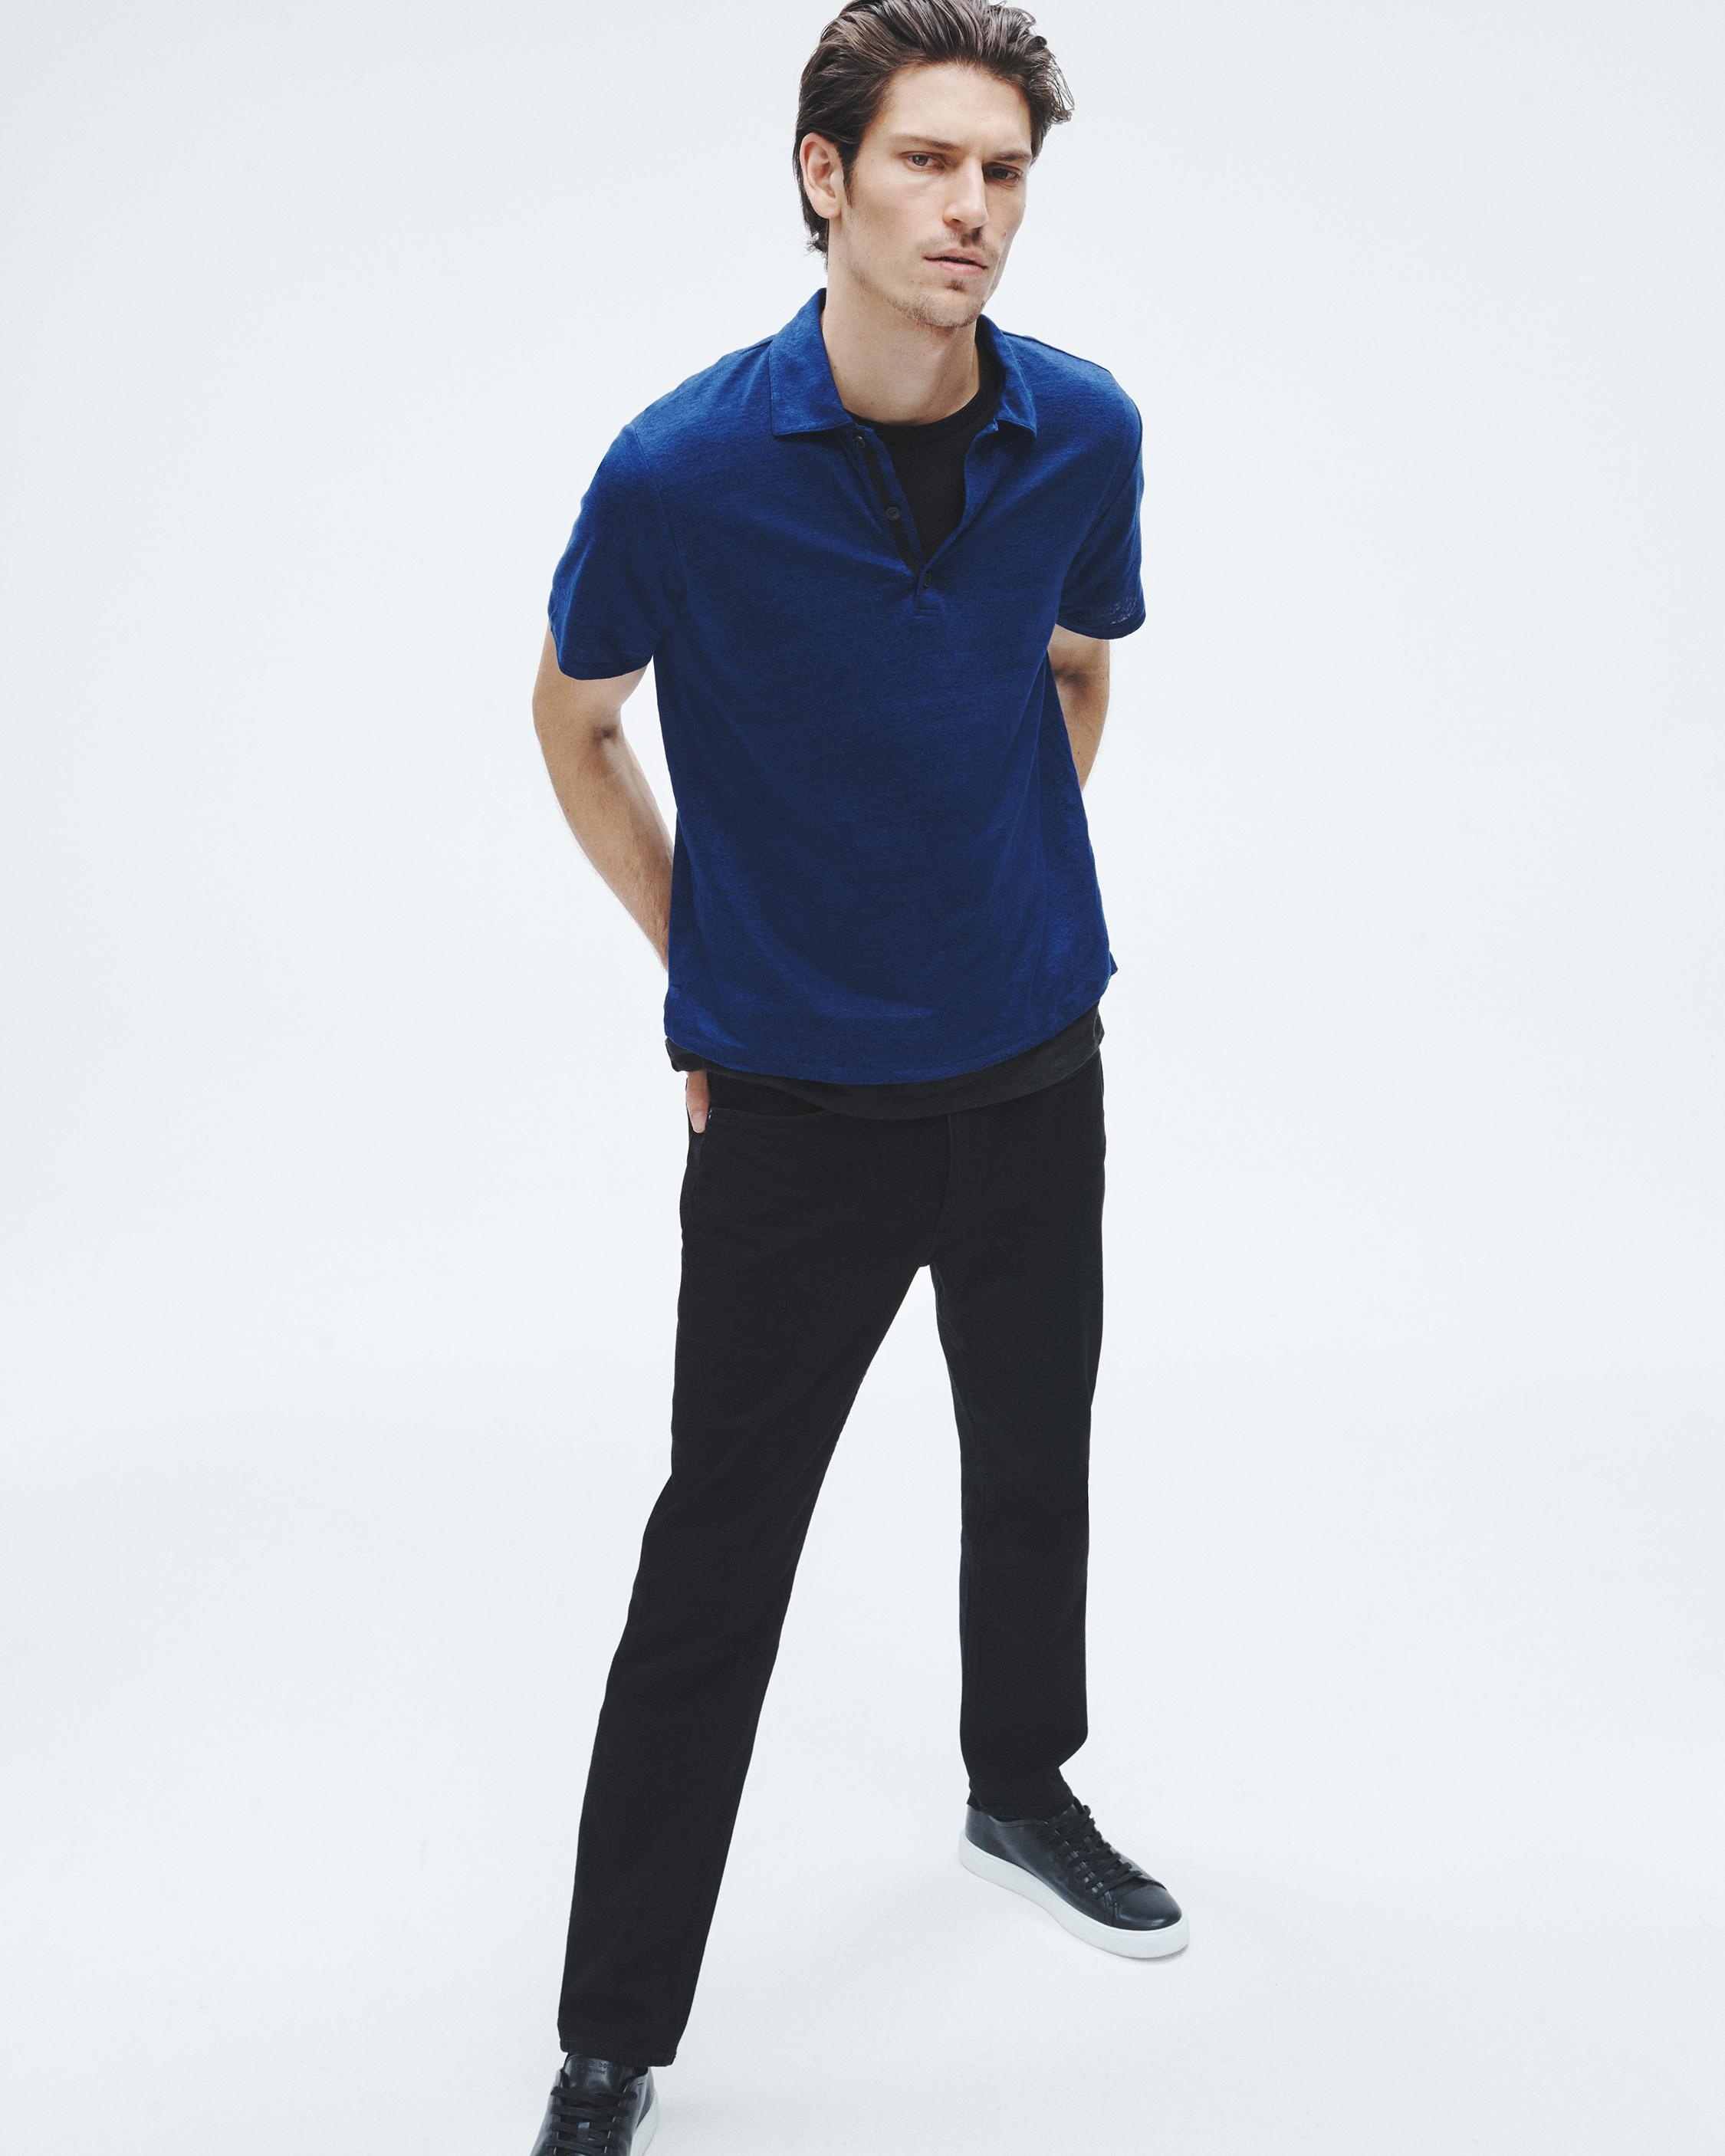 Classic Linen Polo
Classic Fit - 6